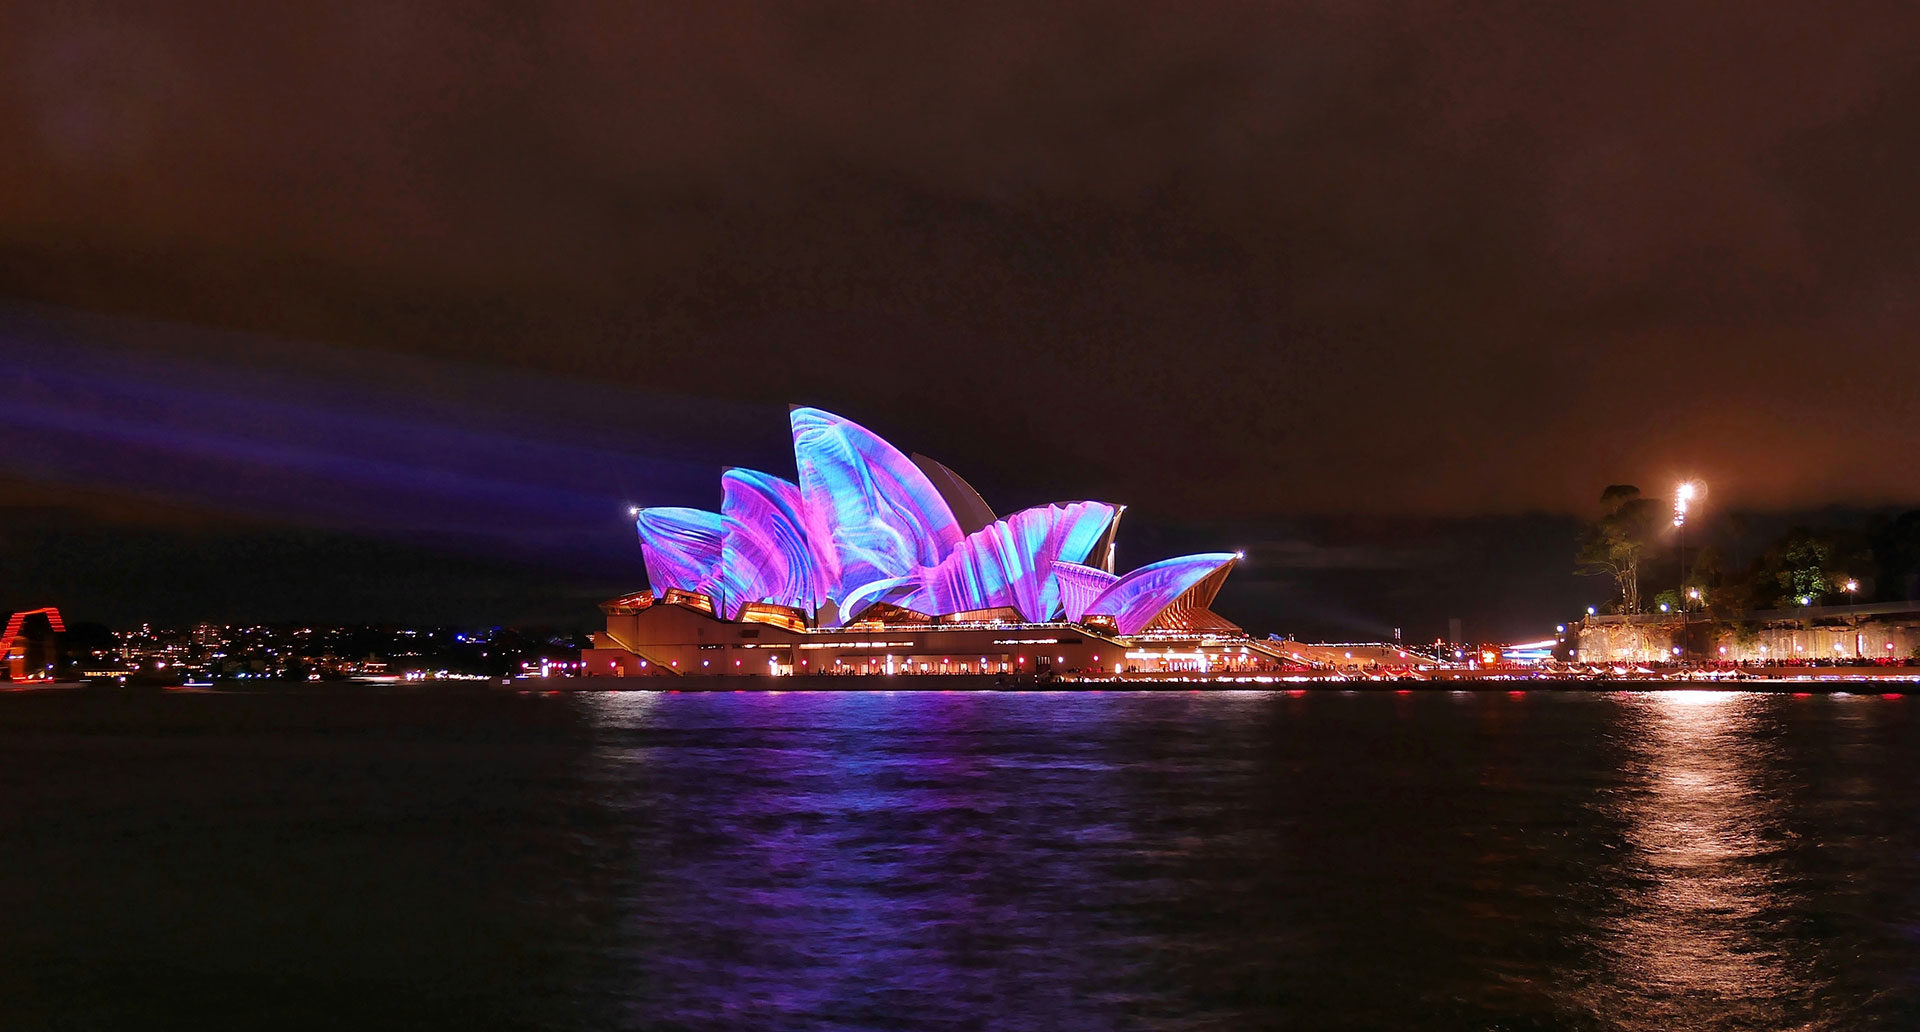 Sydney Opera House lit up for Vivid Sydney, viewed from a Journey Beyond River Cruise - KKDay Things to Do in Sydney for the family